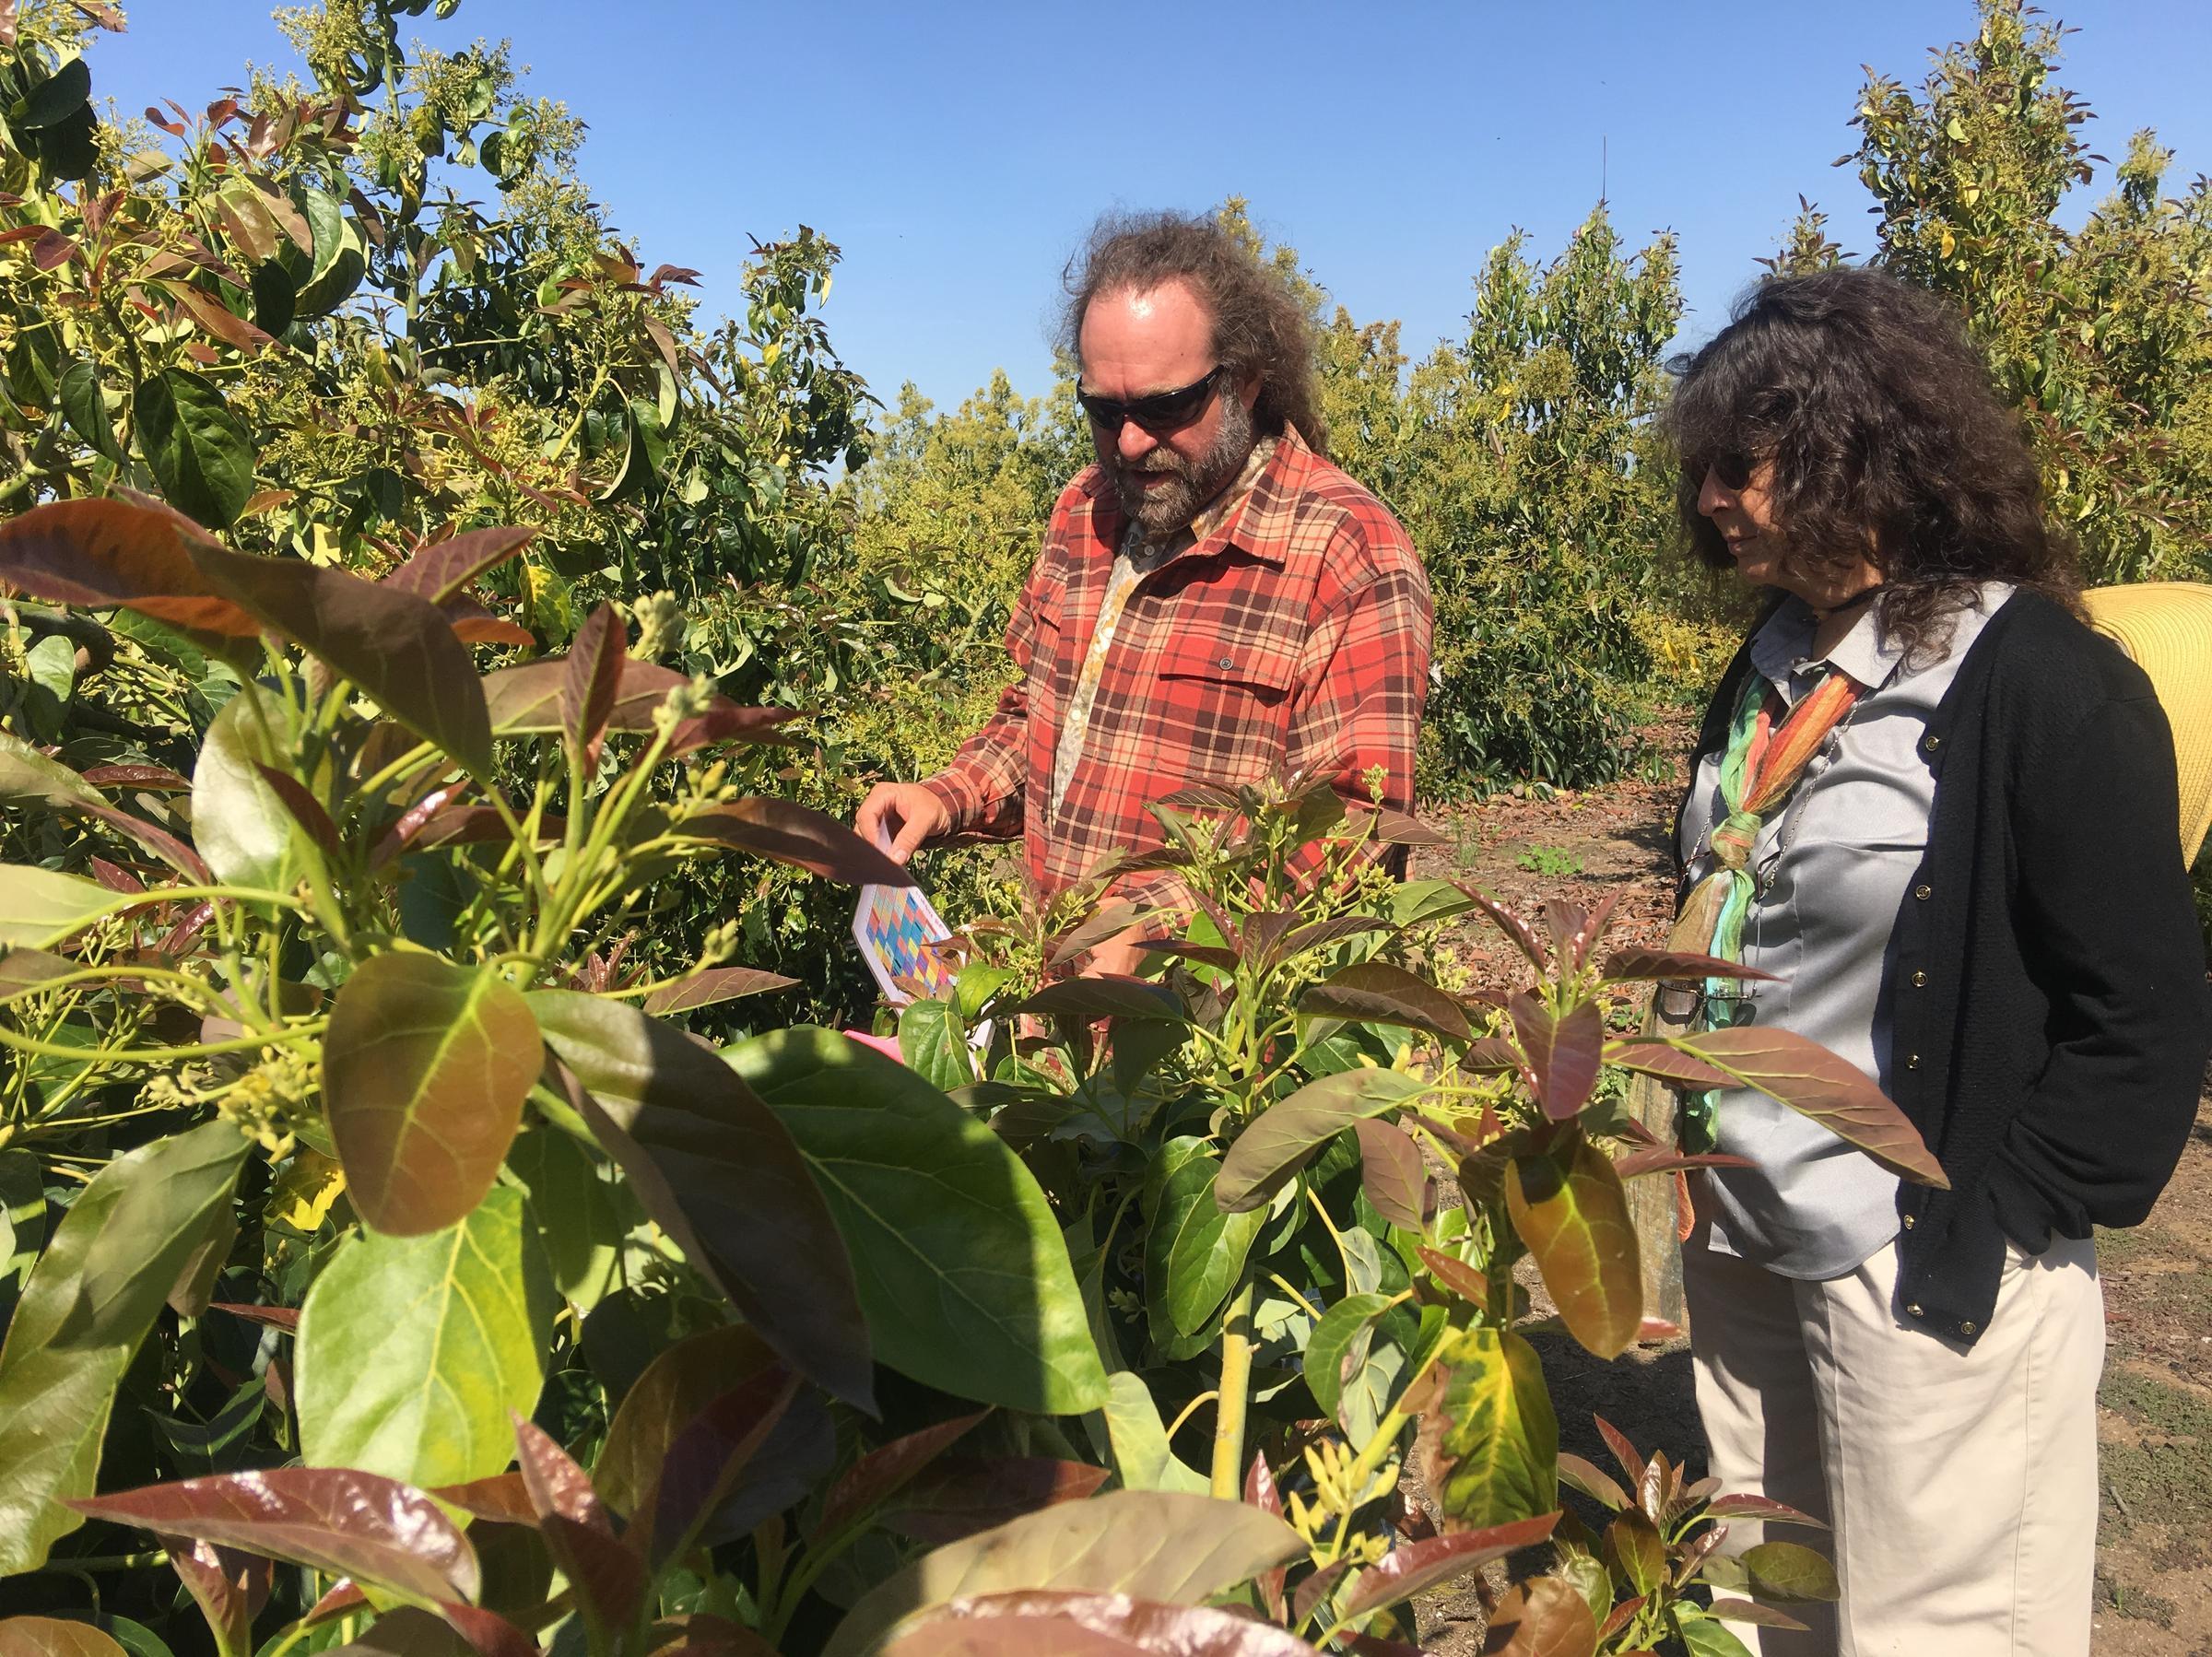 Eric Focht and Mary Lu Arpaia breed avocado trees across California. They're in search of varieties that will grow well in California's Central Valley.